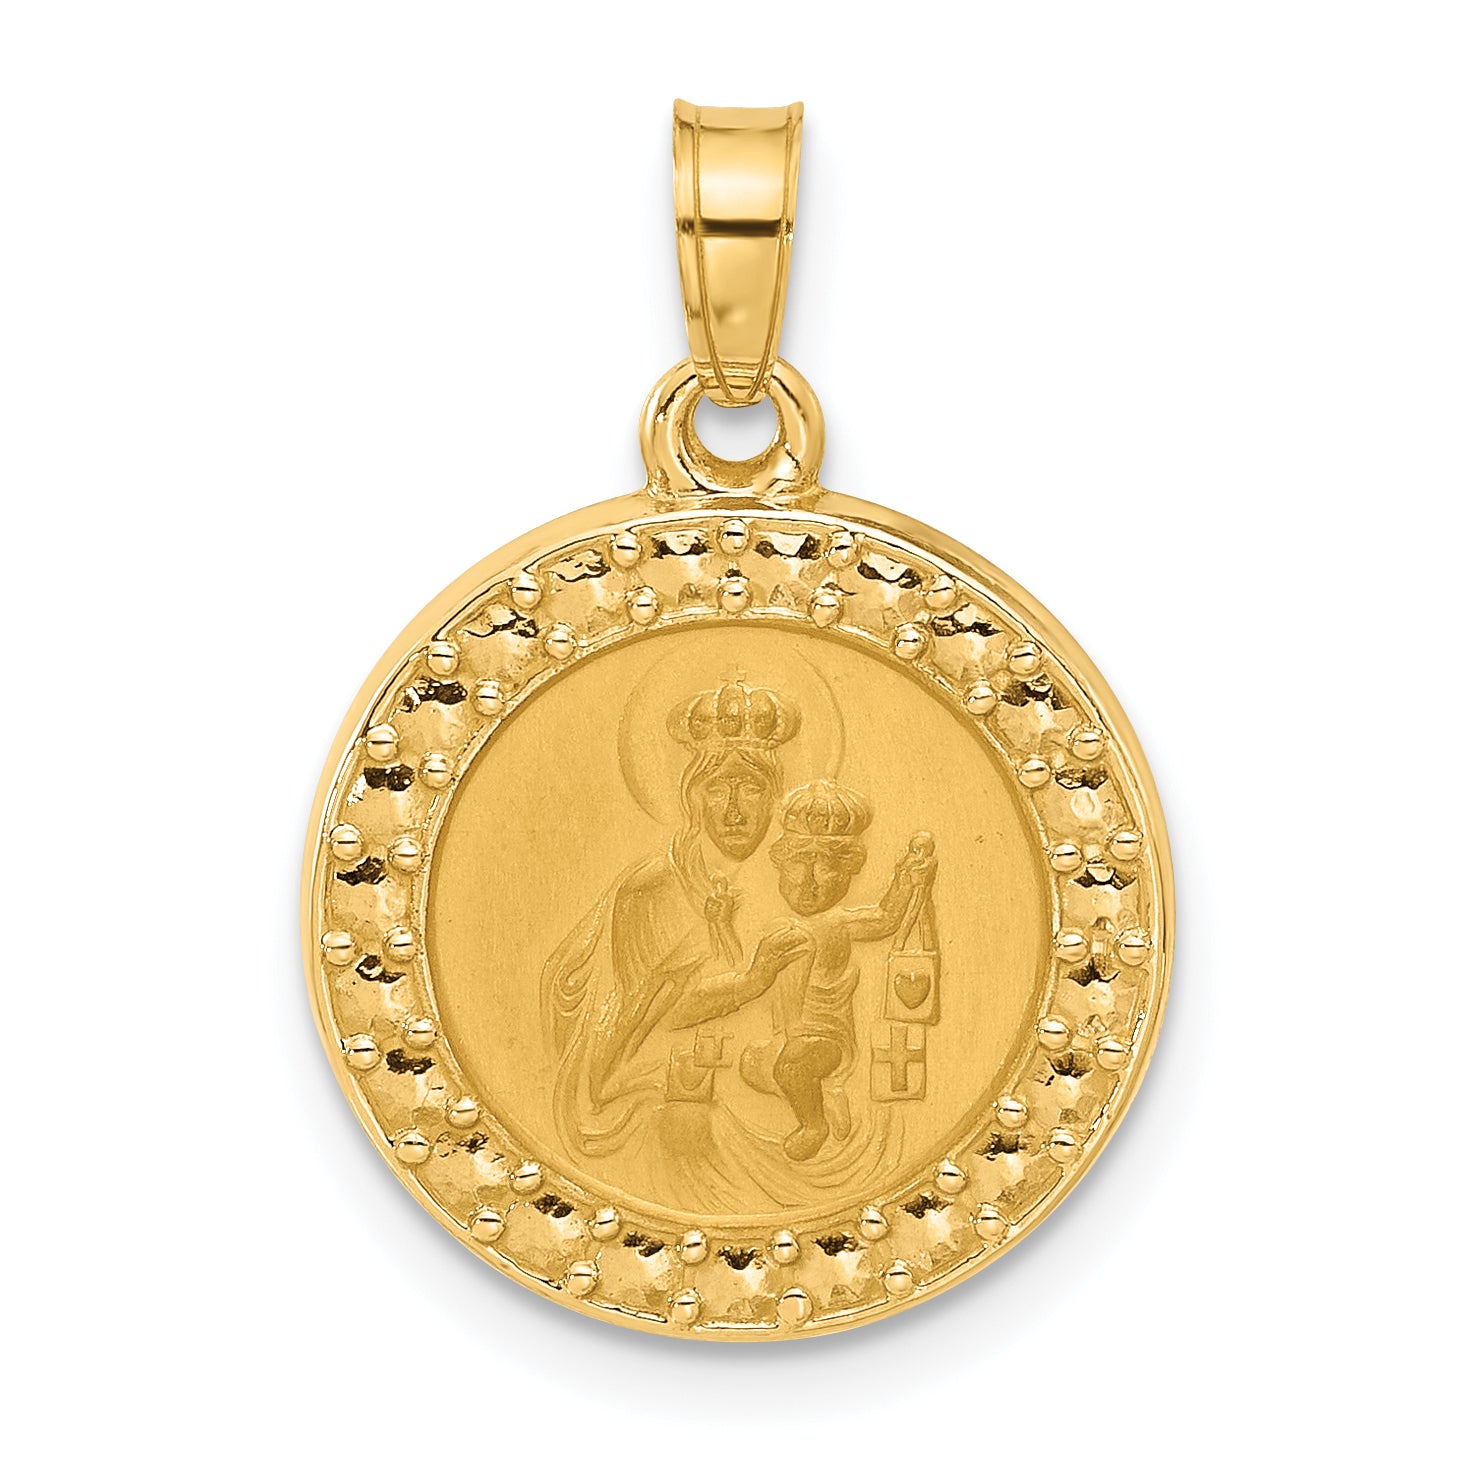 14K Hollow Our Lady of Mt Carmel Medal